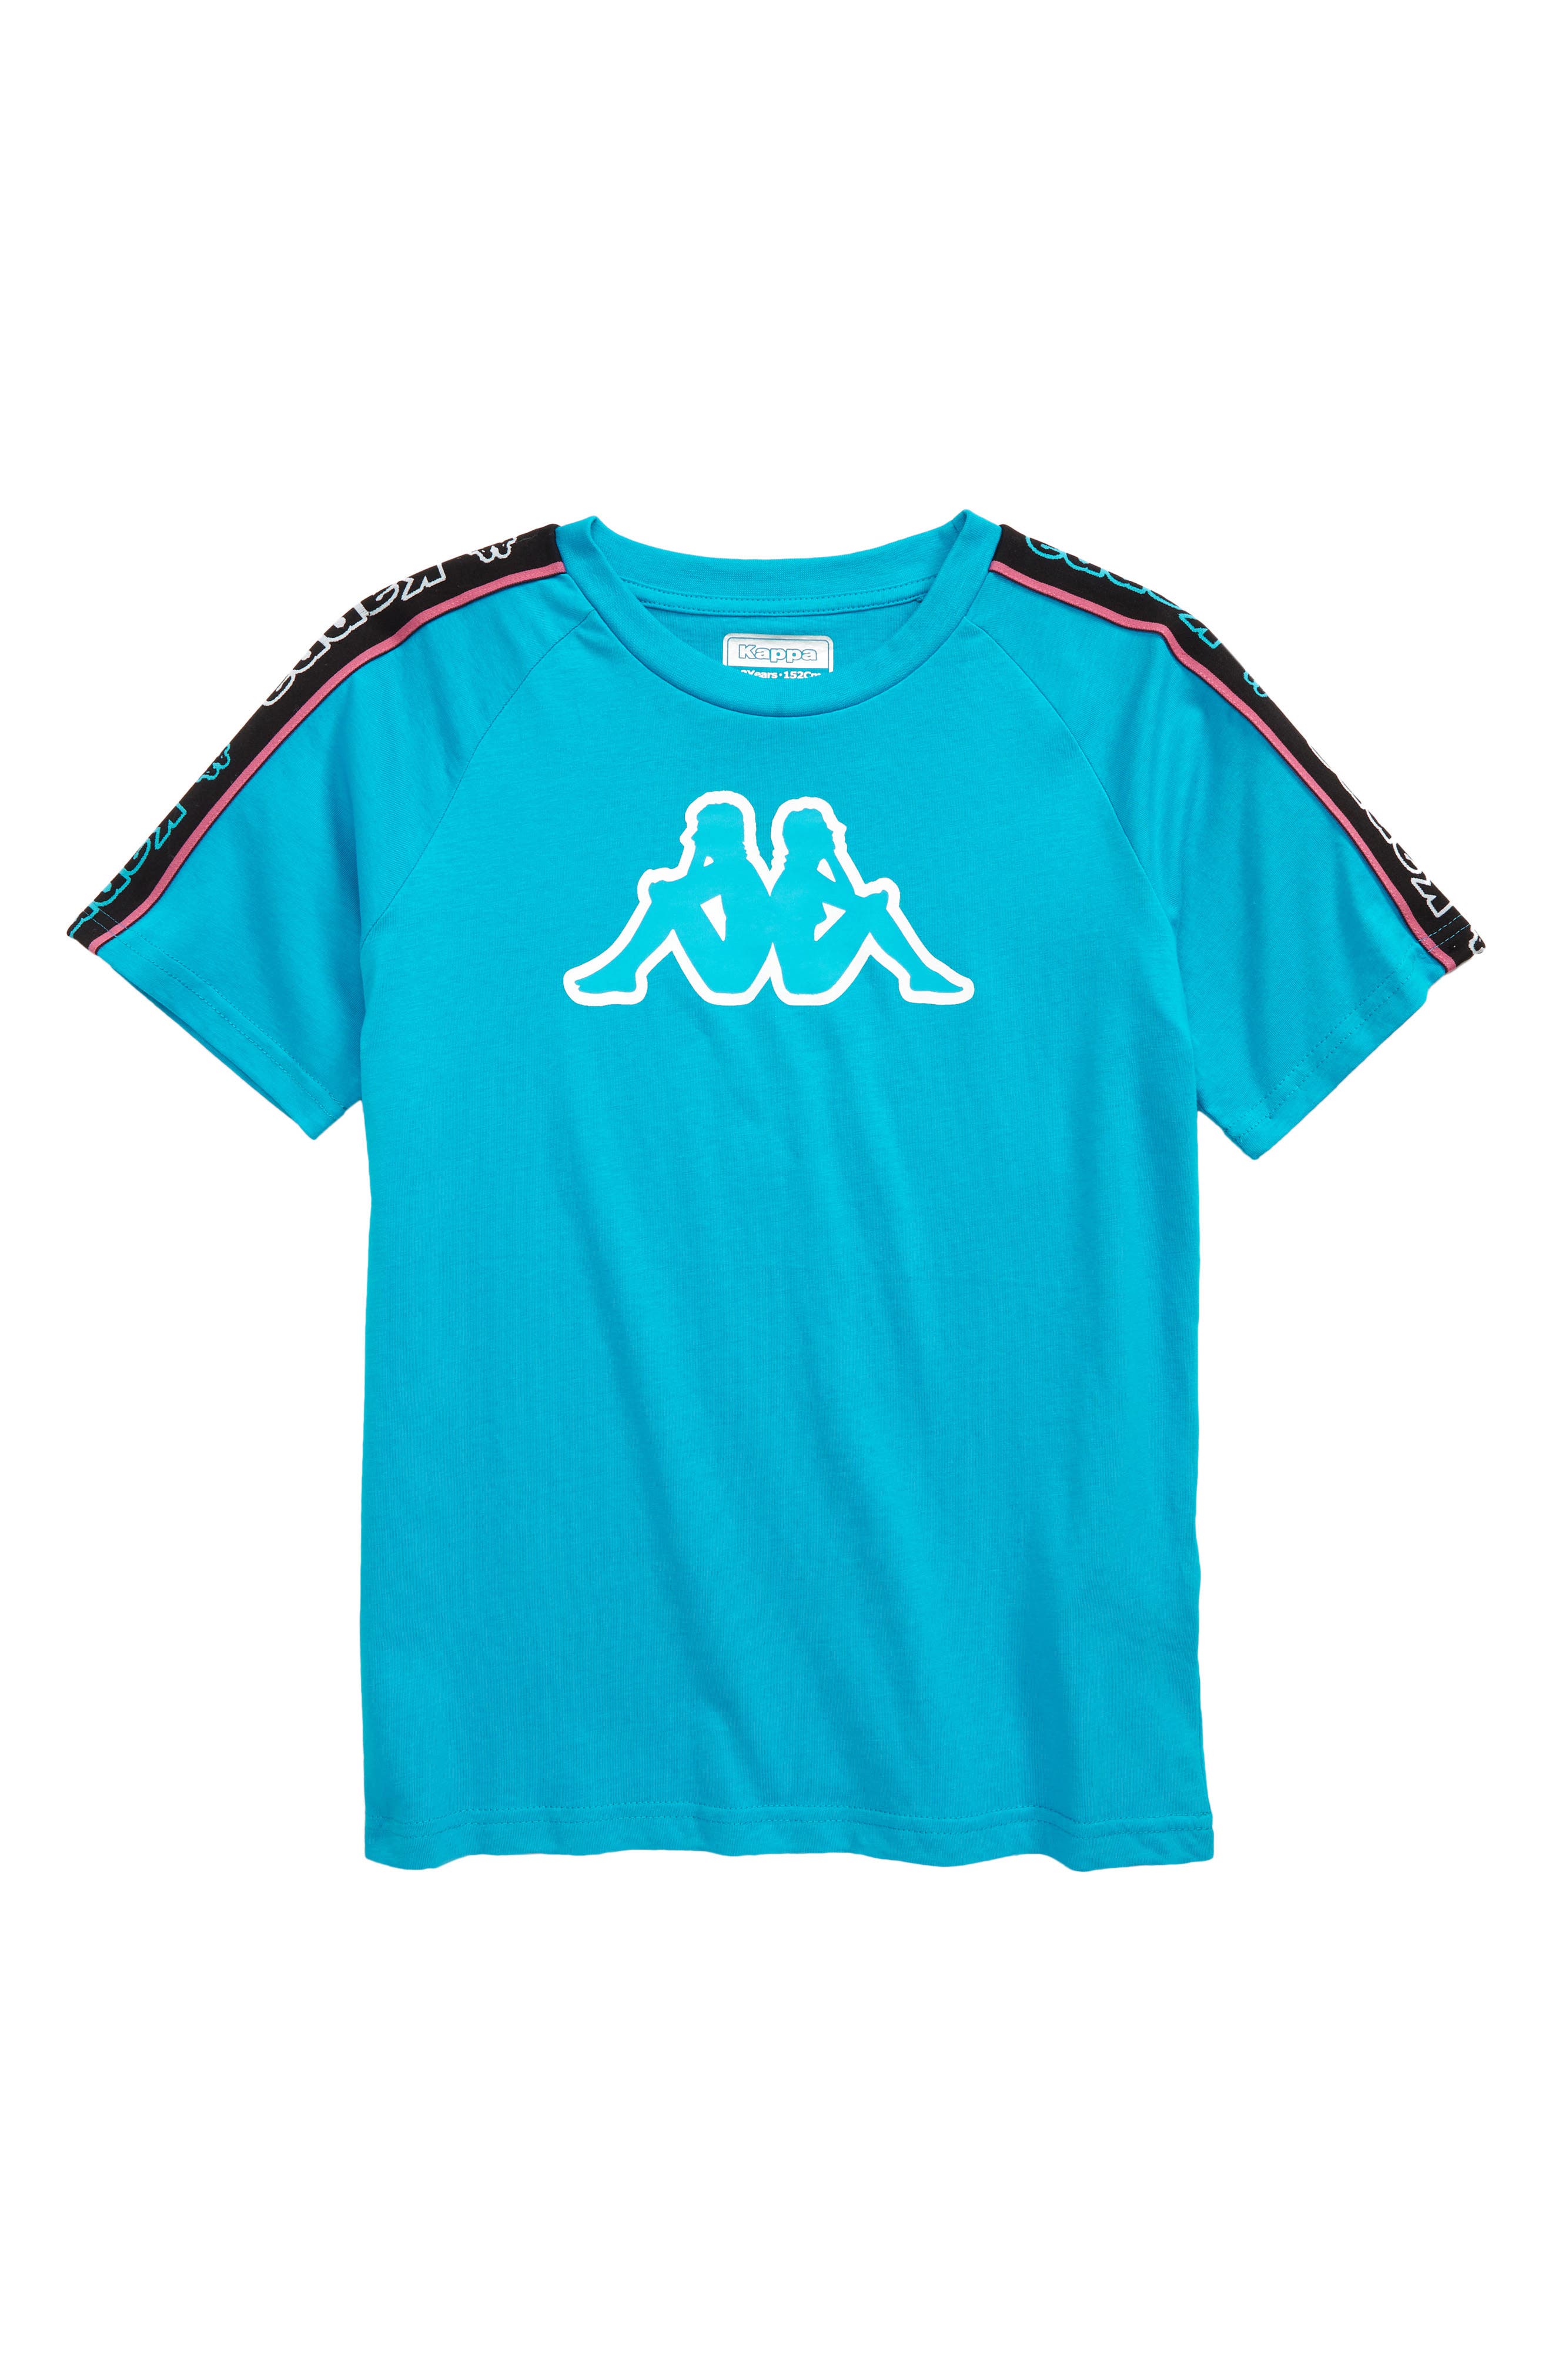 Kappa Kids' Avirec-2 Logo Tape Graphic Tee in Blue Turkis at Nordstrom, Size 12Y Us